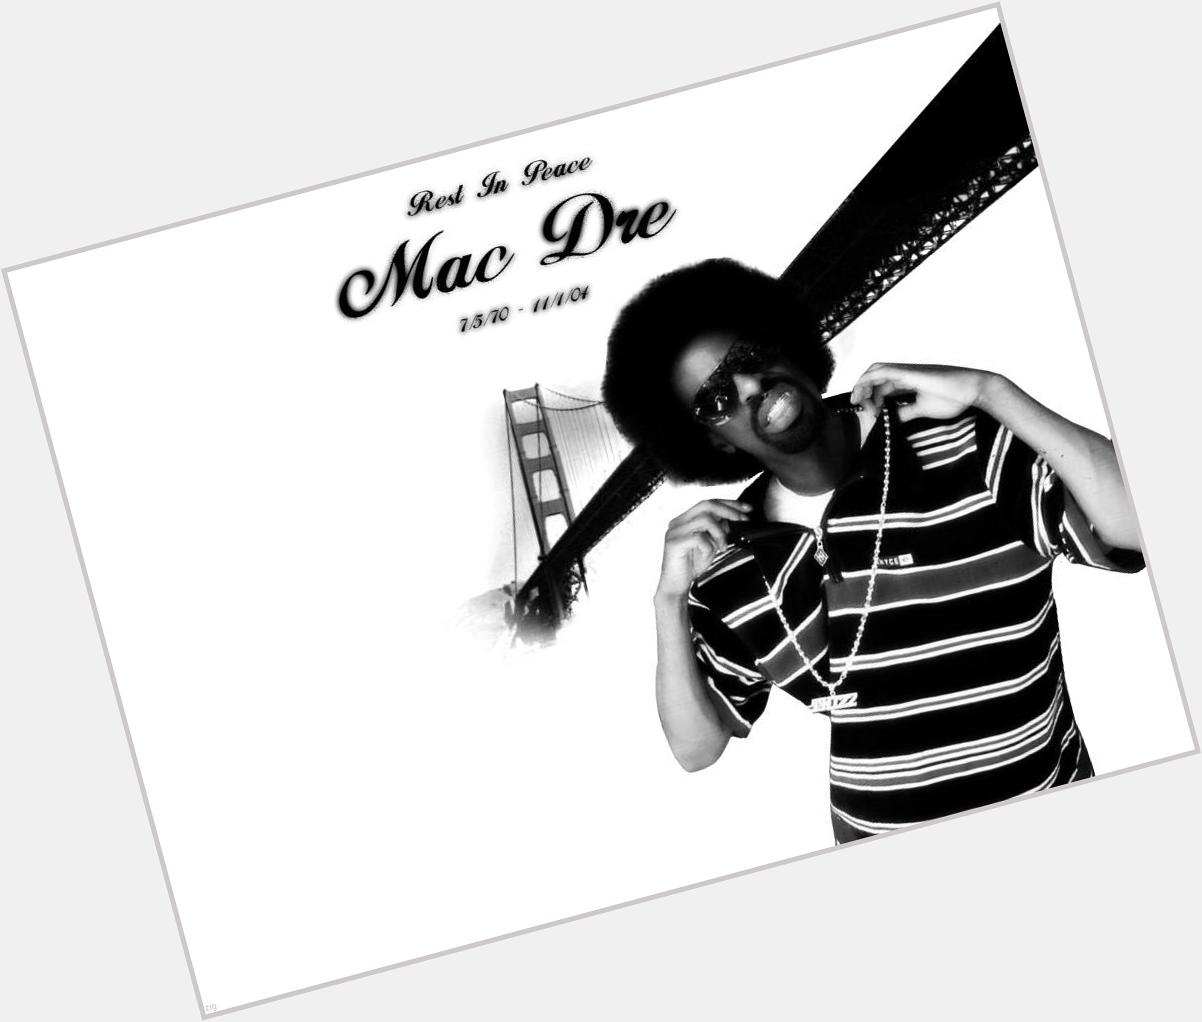 HAPPY BIRTHDAY TO MAC DRE THIZZ IN PEACE BRUH        